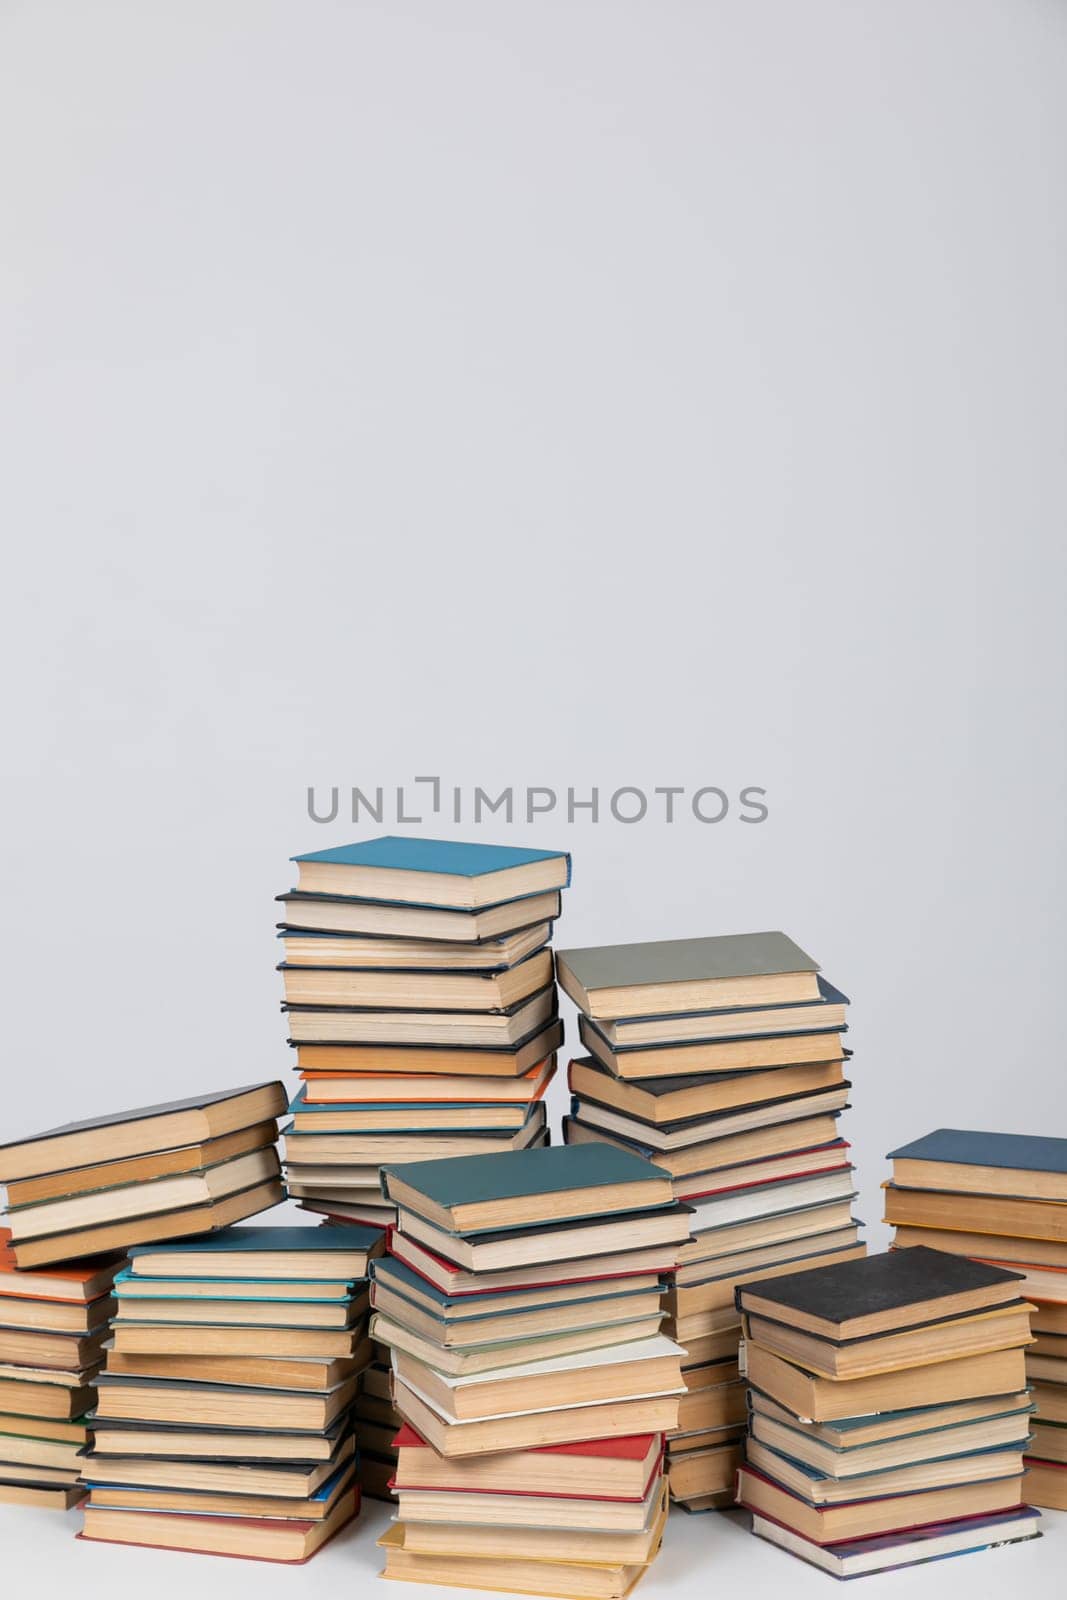 a science education stack of books on white background teaching literacy